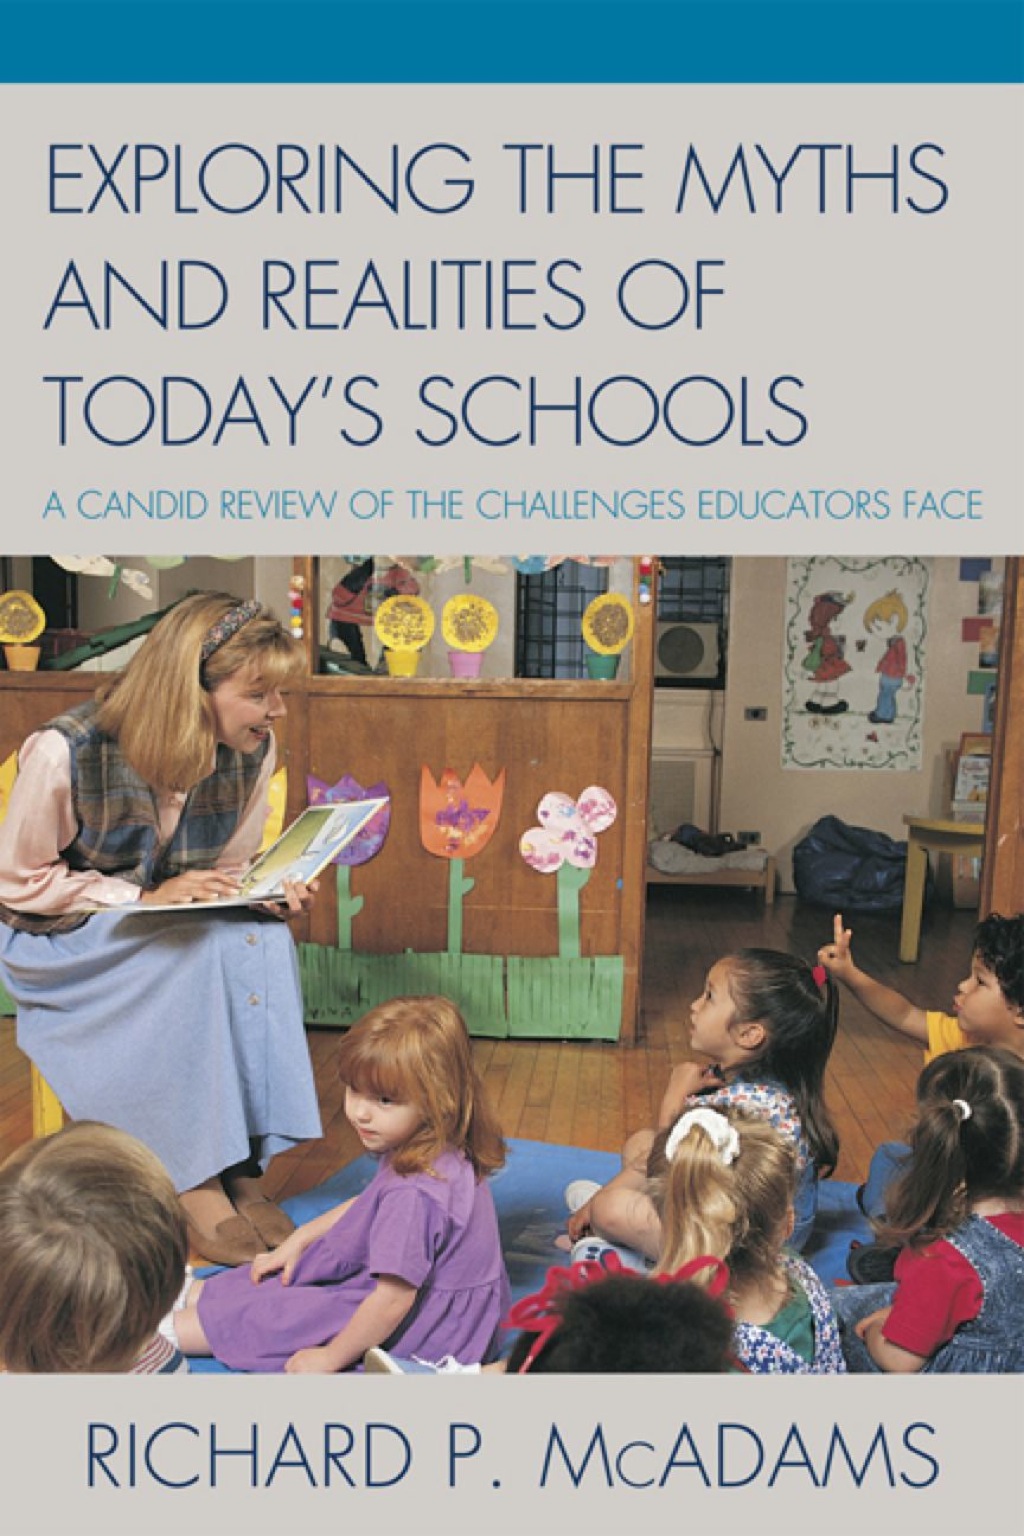 Exploring the Myths and the Realities of Today's Schools (eBook Rental) - Richard P. McAdams,